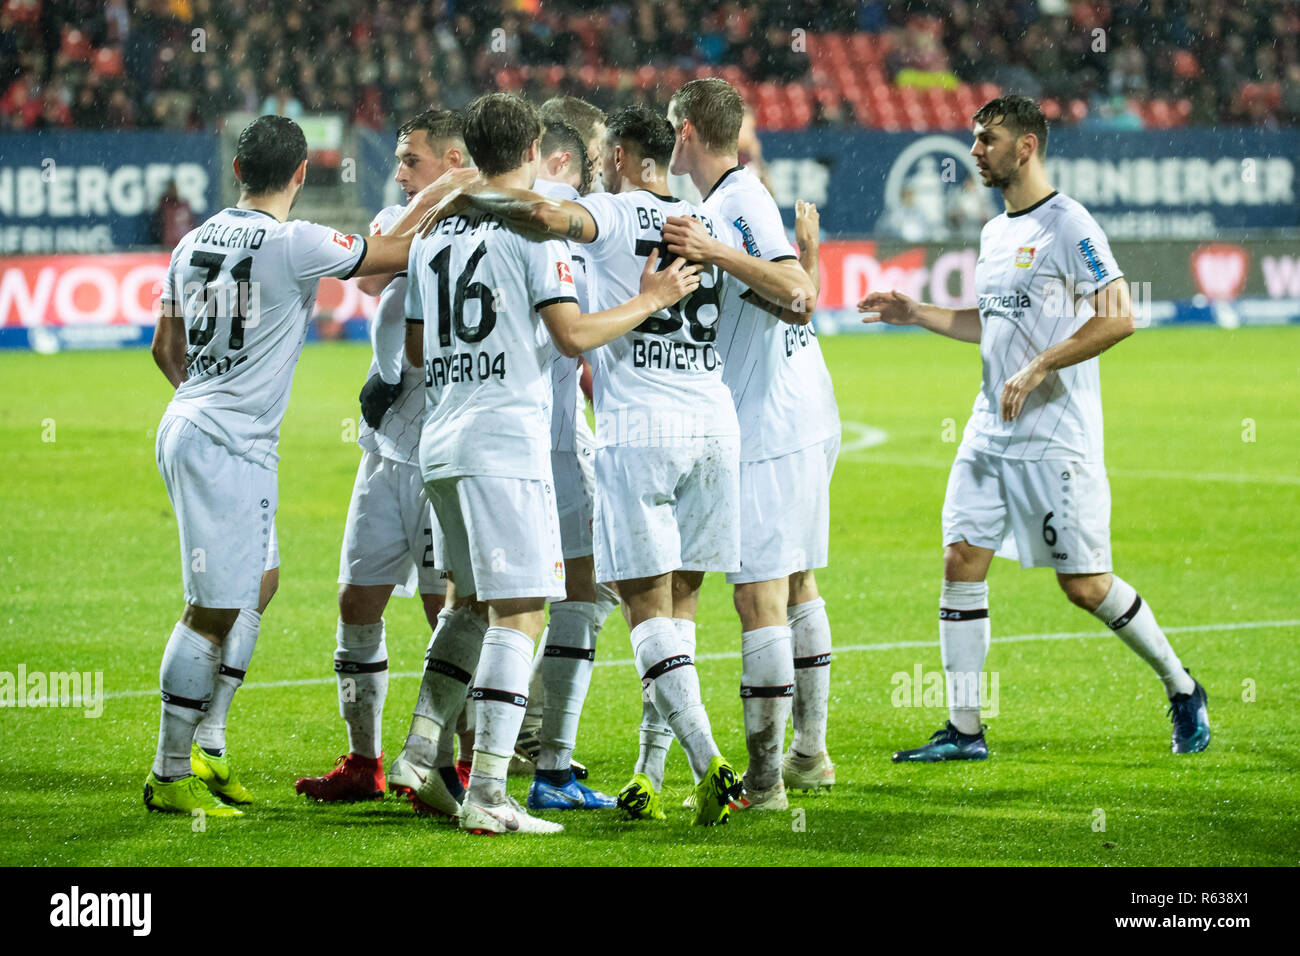 Nuremberg, Germany. 3rd Dec, 2018. Leverkusen's players celebrate scoring during a German Bundesliga between 1.FC Nuremberg and Bayer 04 Leverkusen, in Nuremberg, Germany, on Dec. 3, 2018. The match ended 1-1. Credit: Kevin Voigt/Xinhua/Alamy Live News Stock Photo